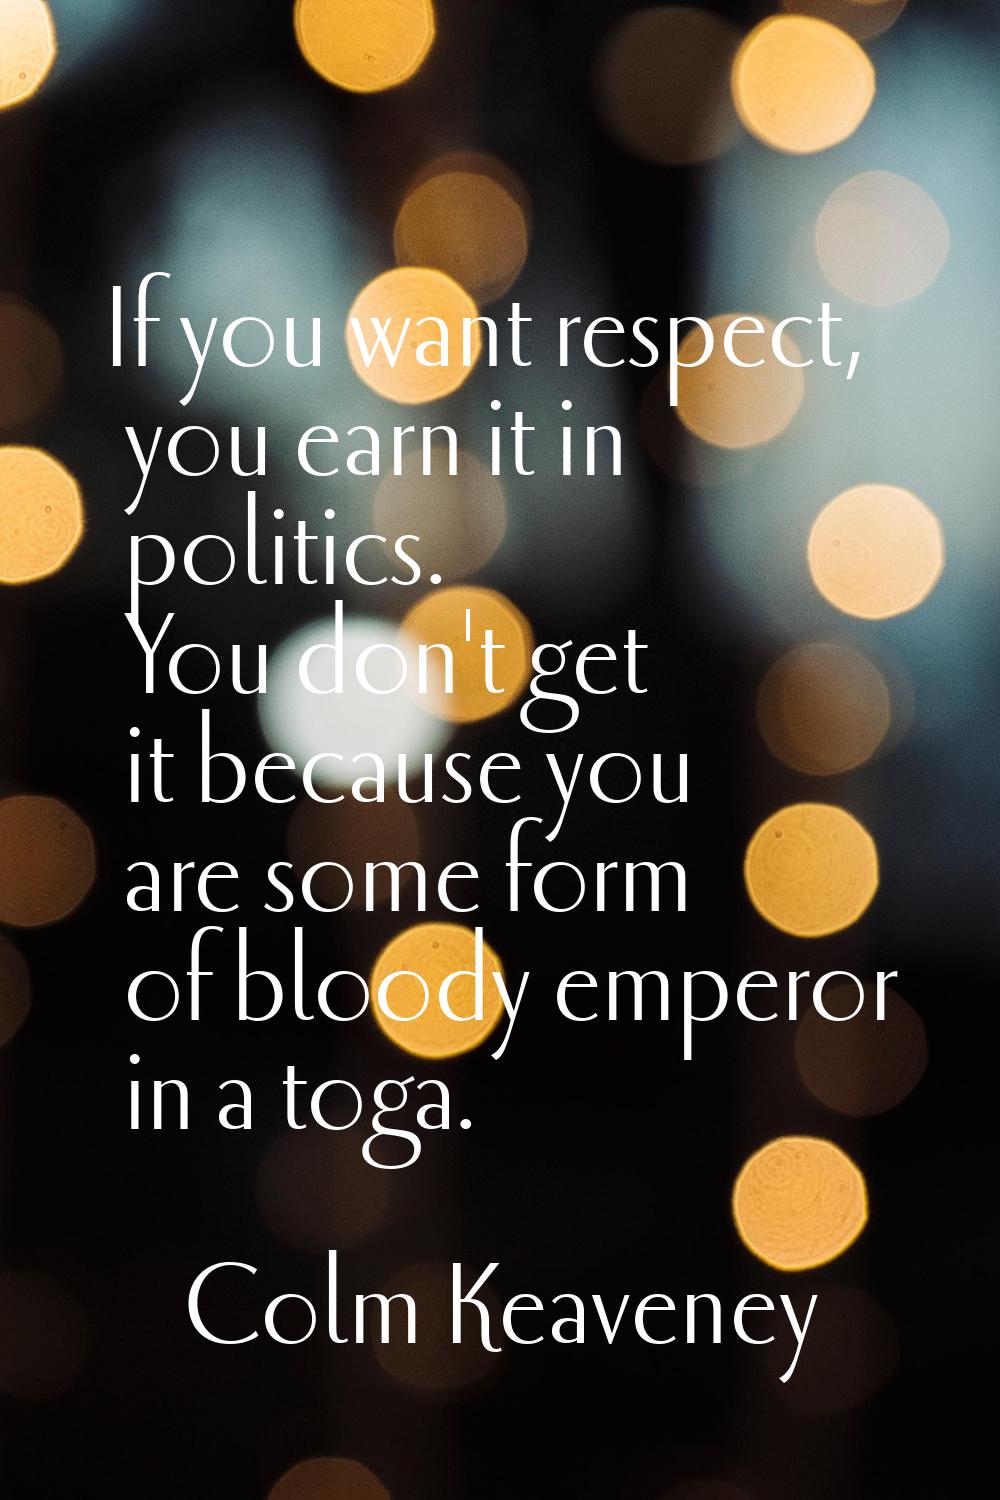 If you want respect, you earn it in politics. You don't get it because you are some form of bloody 